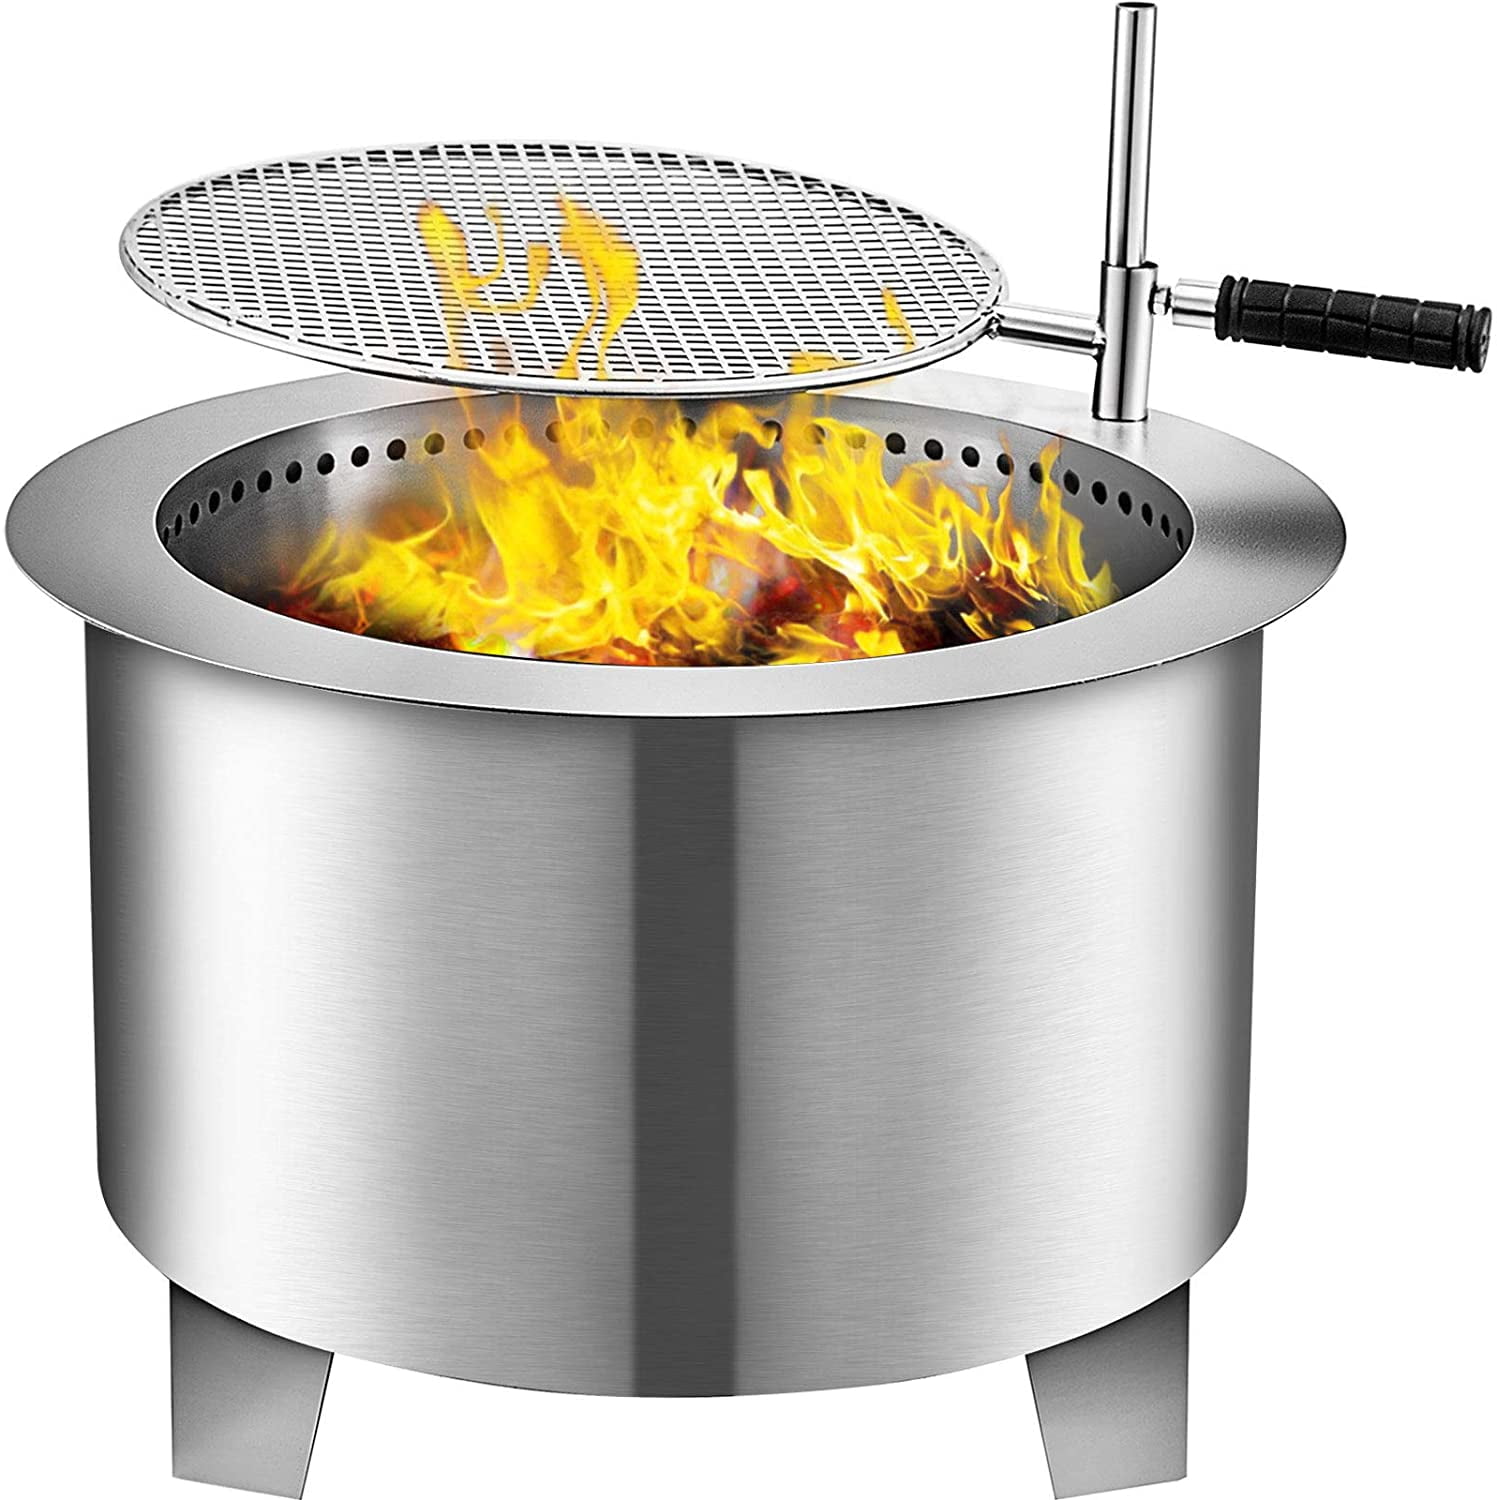 VEVOR Smokeless Fire Pit, Stainless Steel Stove Bonfire, Large 22 